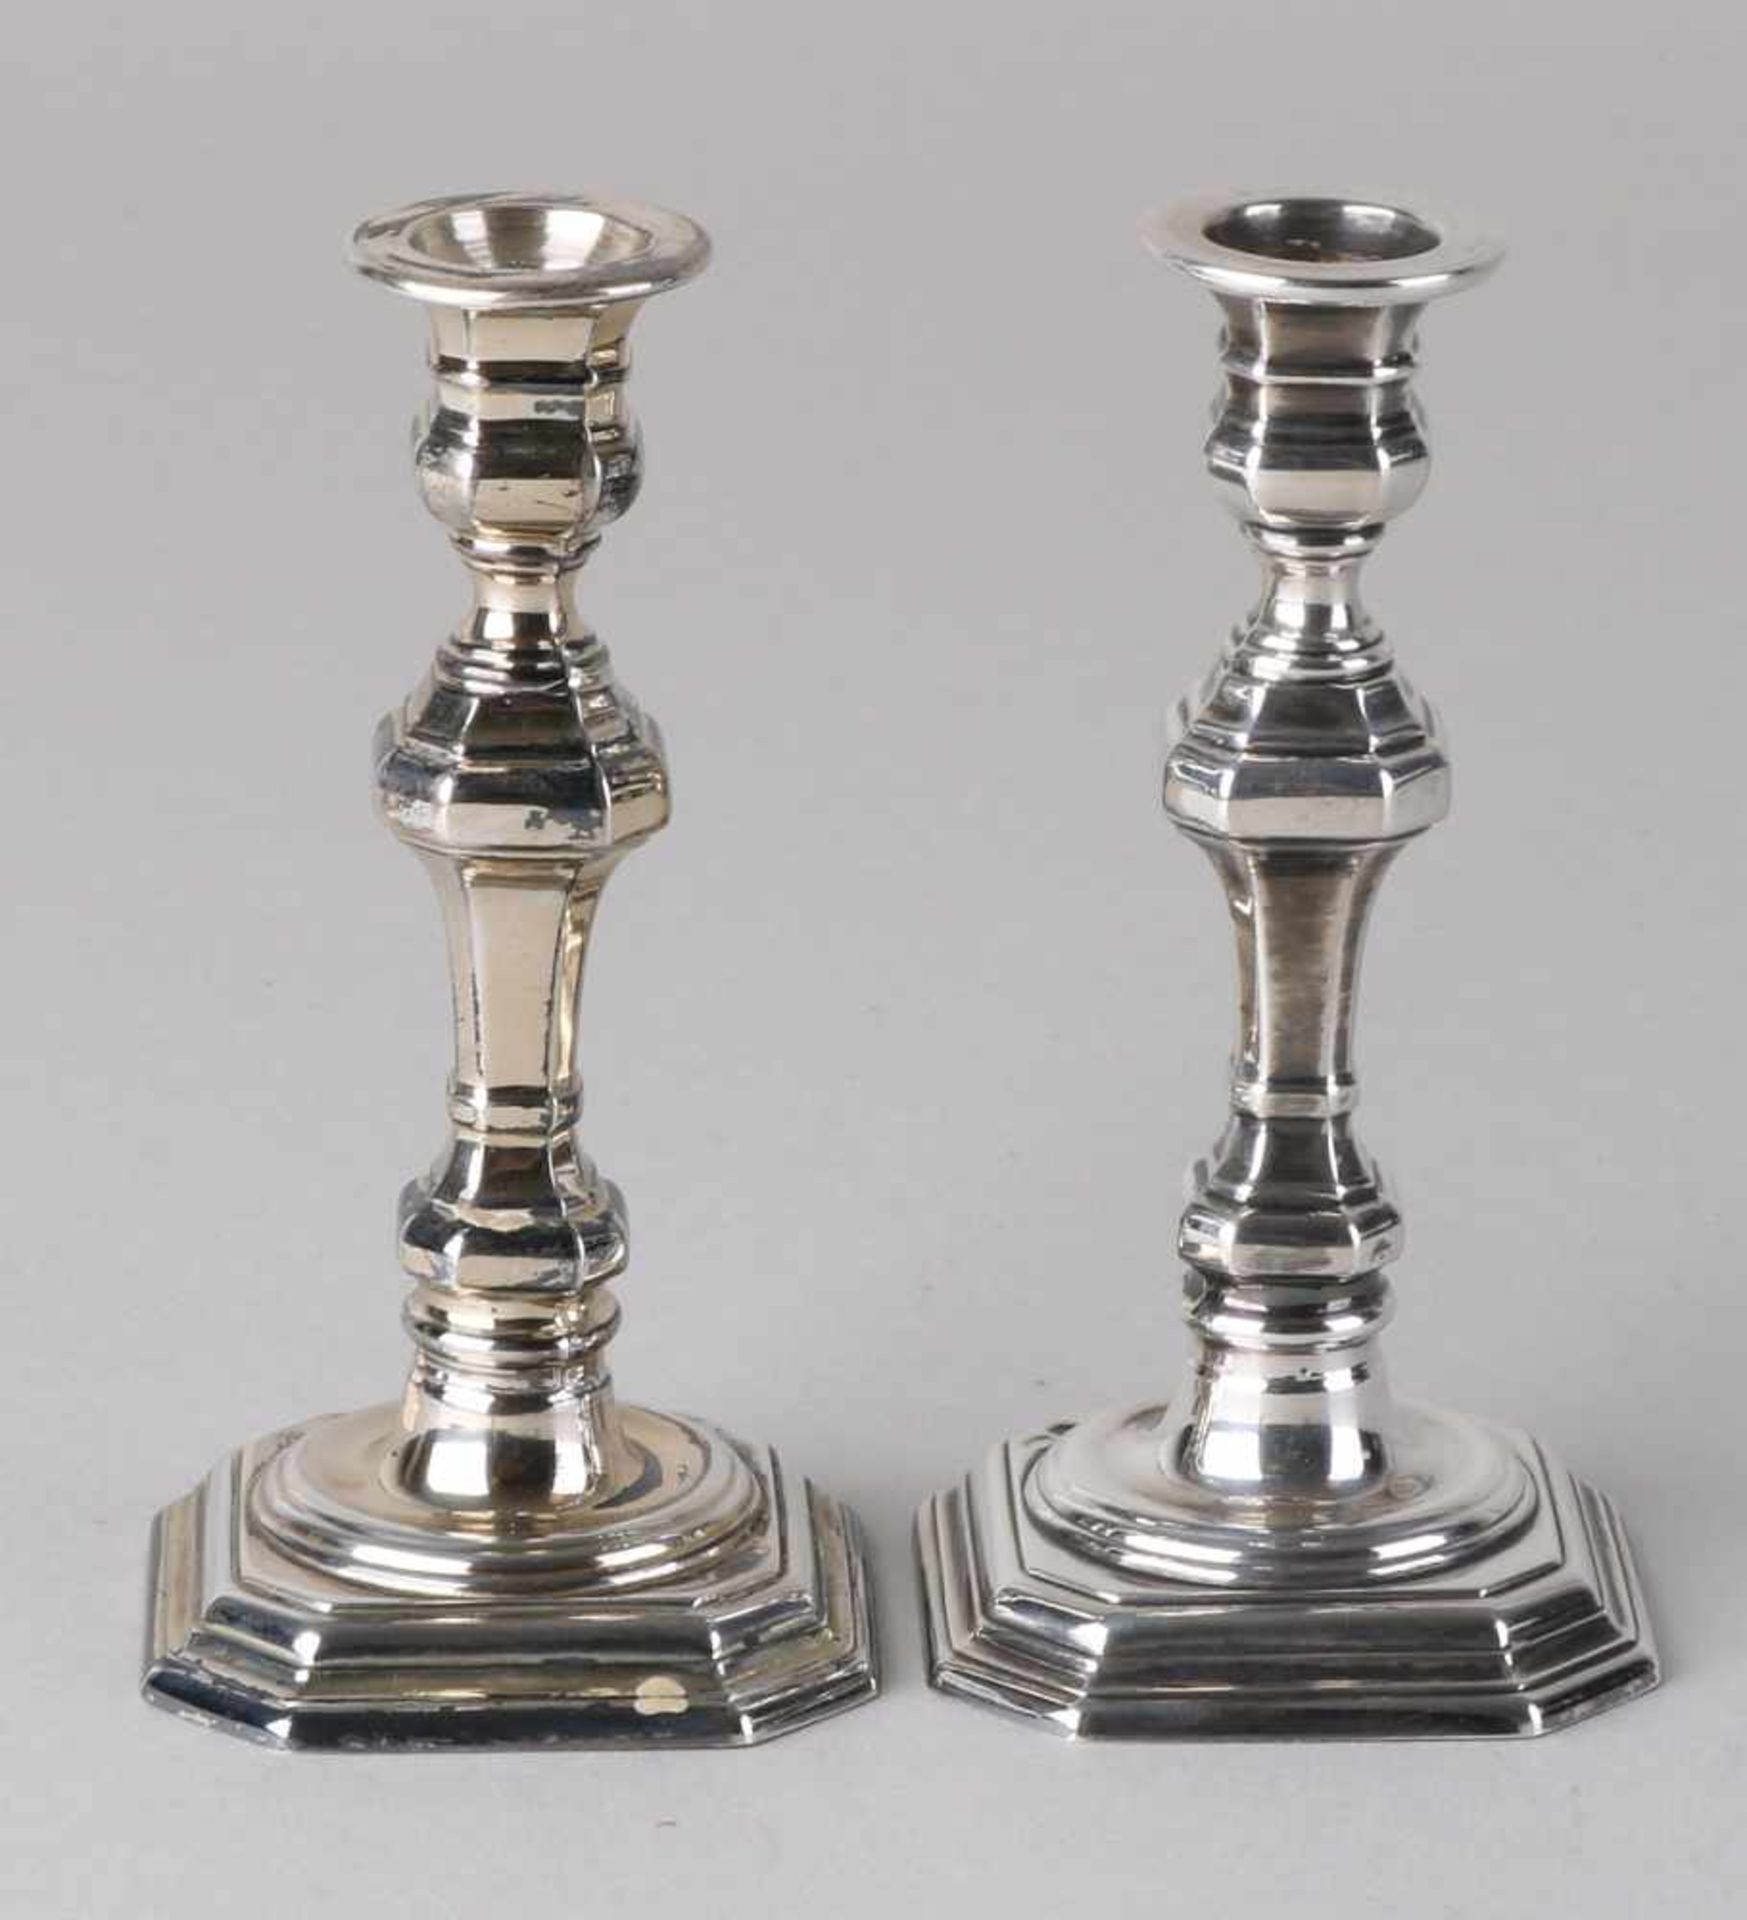 Two small candlesticks, 835/000, on a square contoured base with contoured column and a round light.